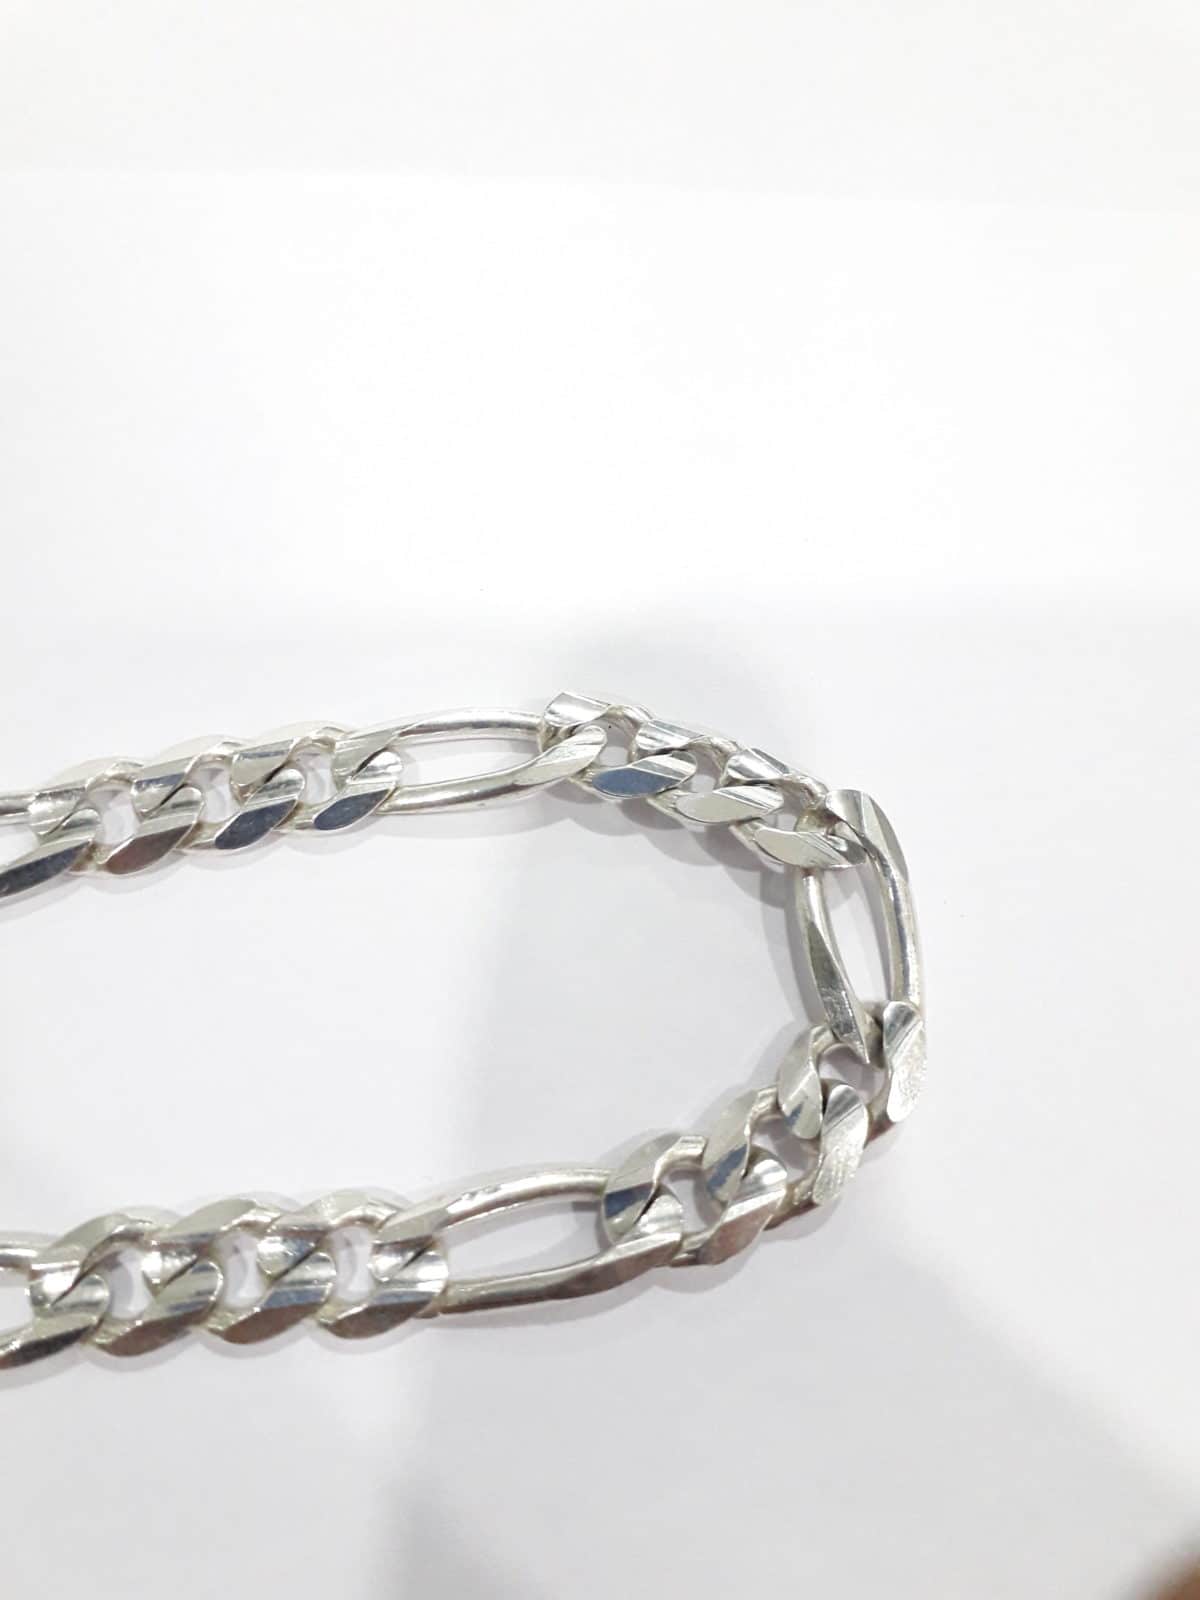 The Best Silver Chains for Men: A Review of Top Brands